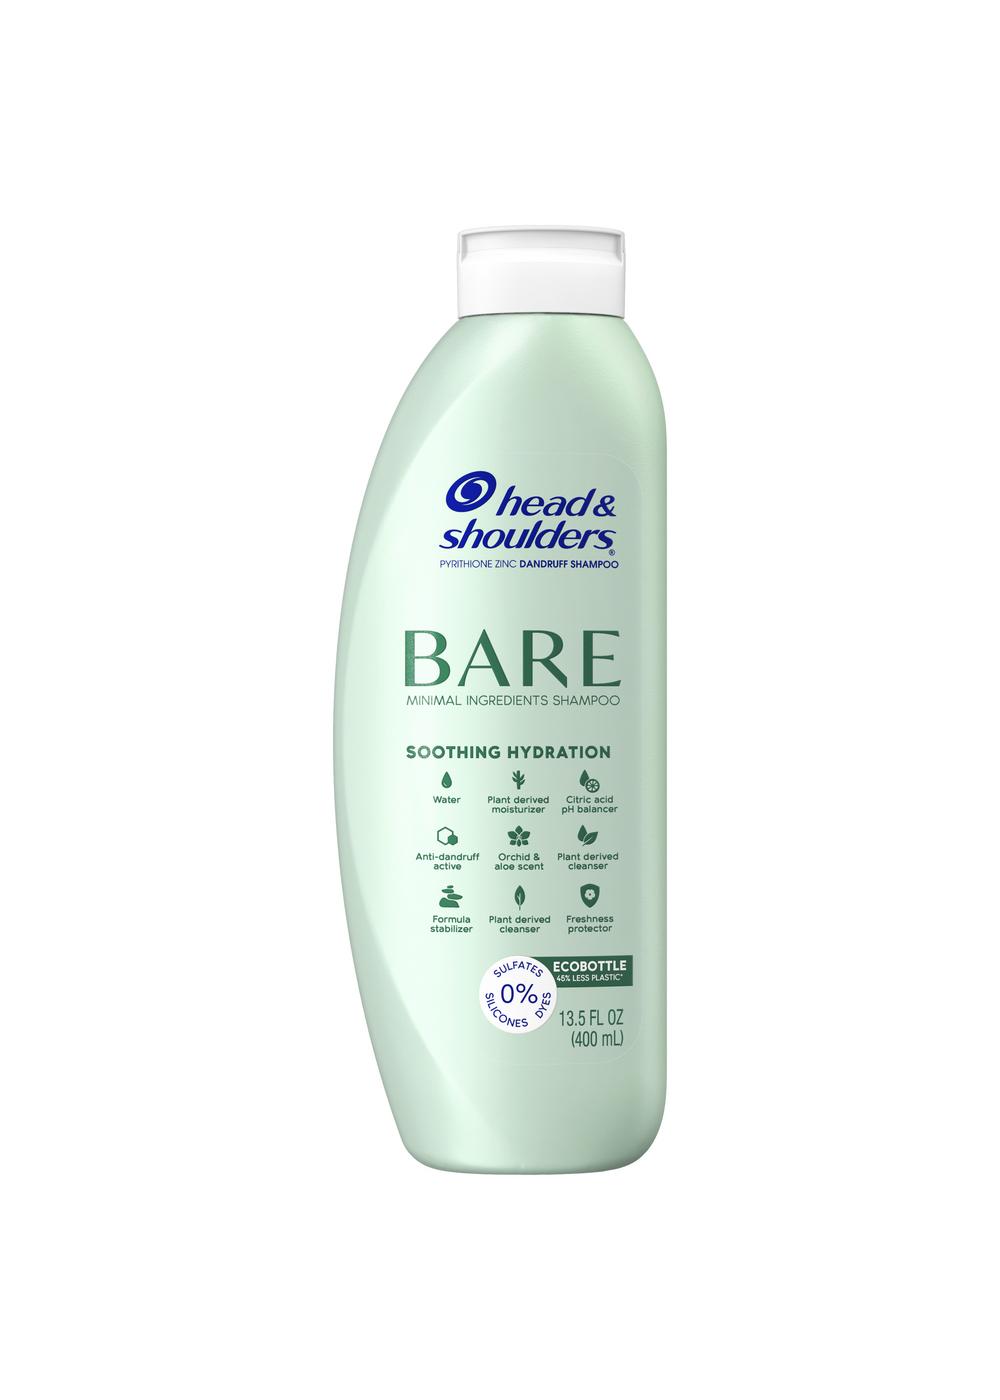 Head & Shoulders Bare Soothing Hydration Shampoo; image 1 of 2